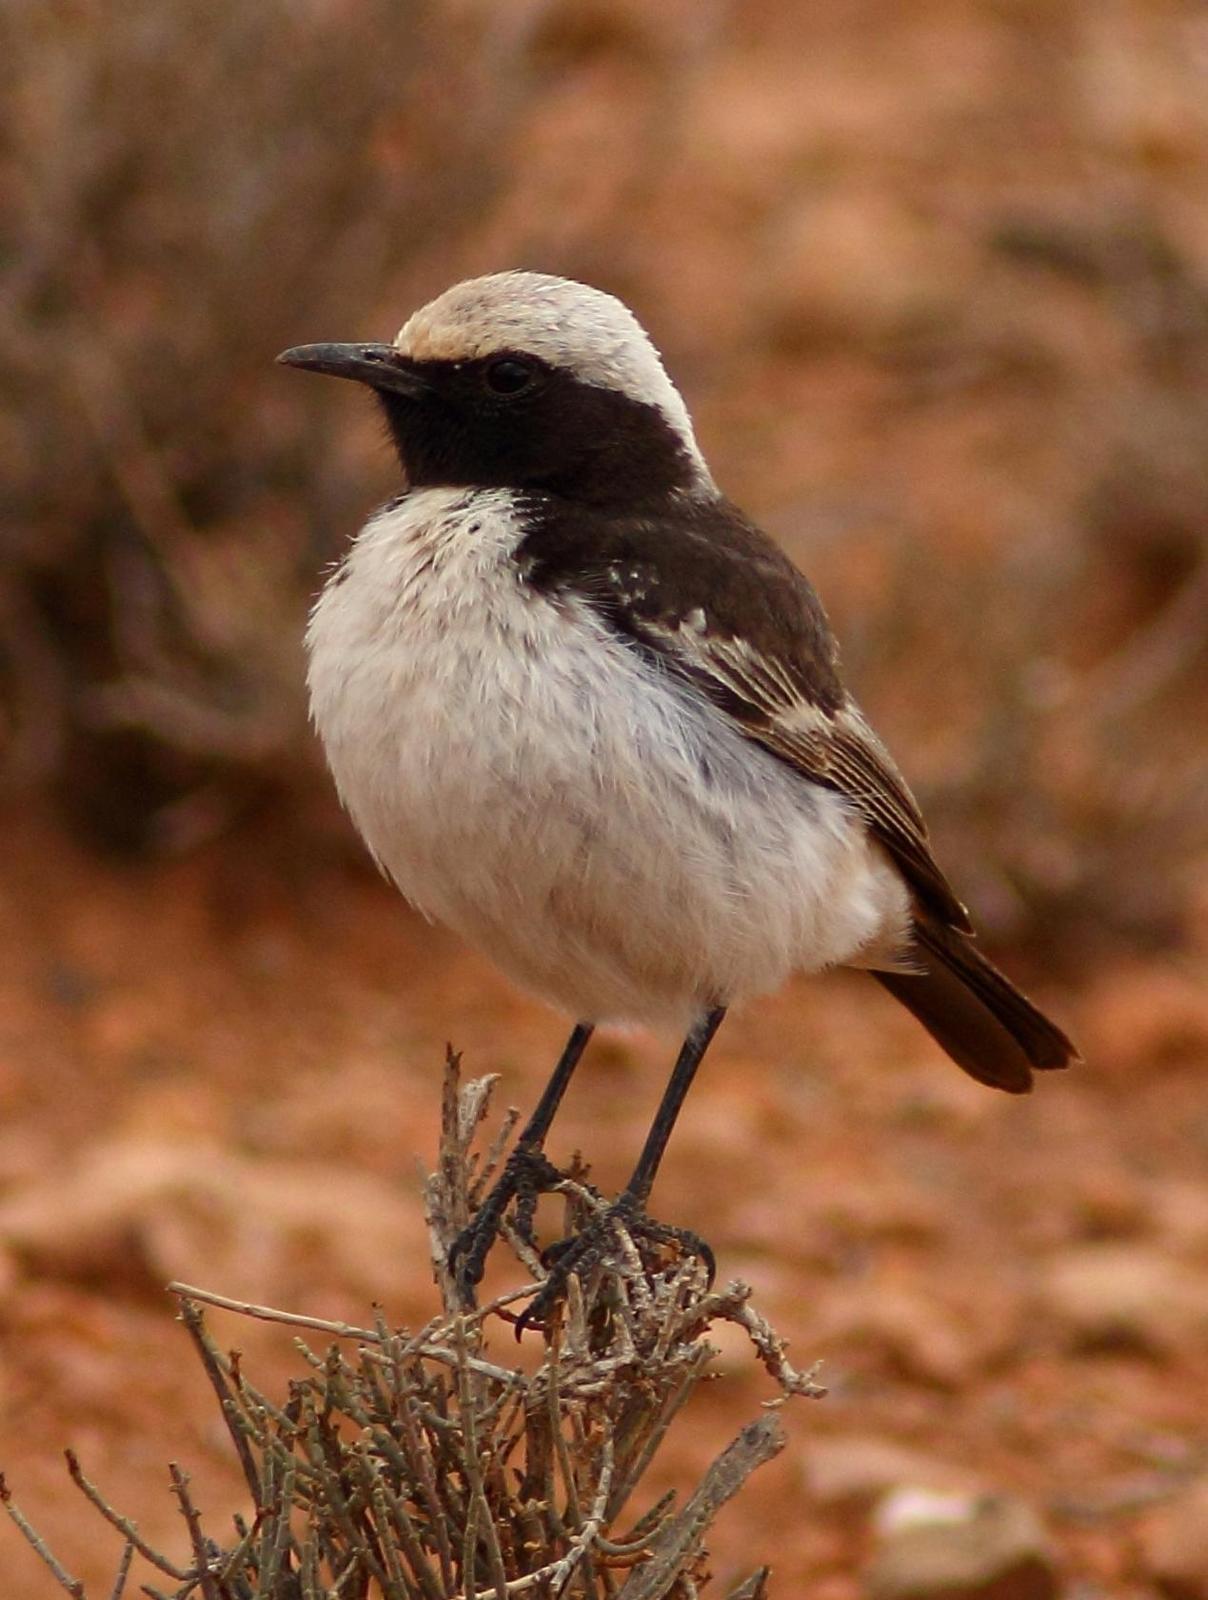 Red-rumped Wheatear Photo by Lee Harding